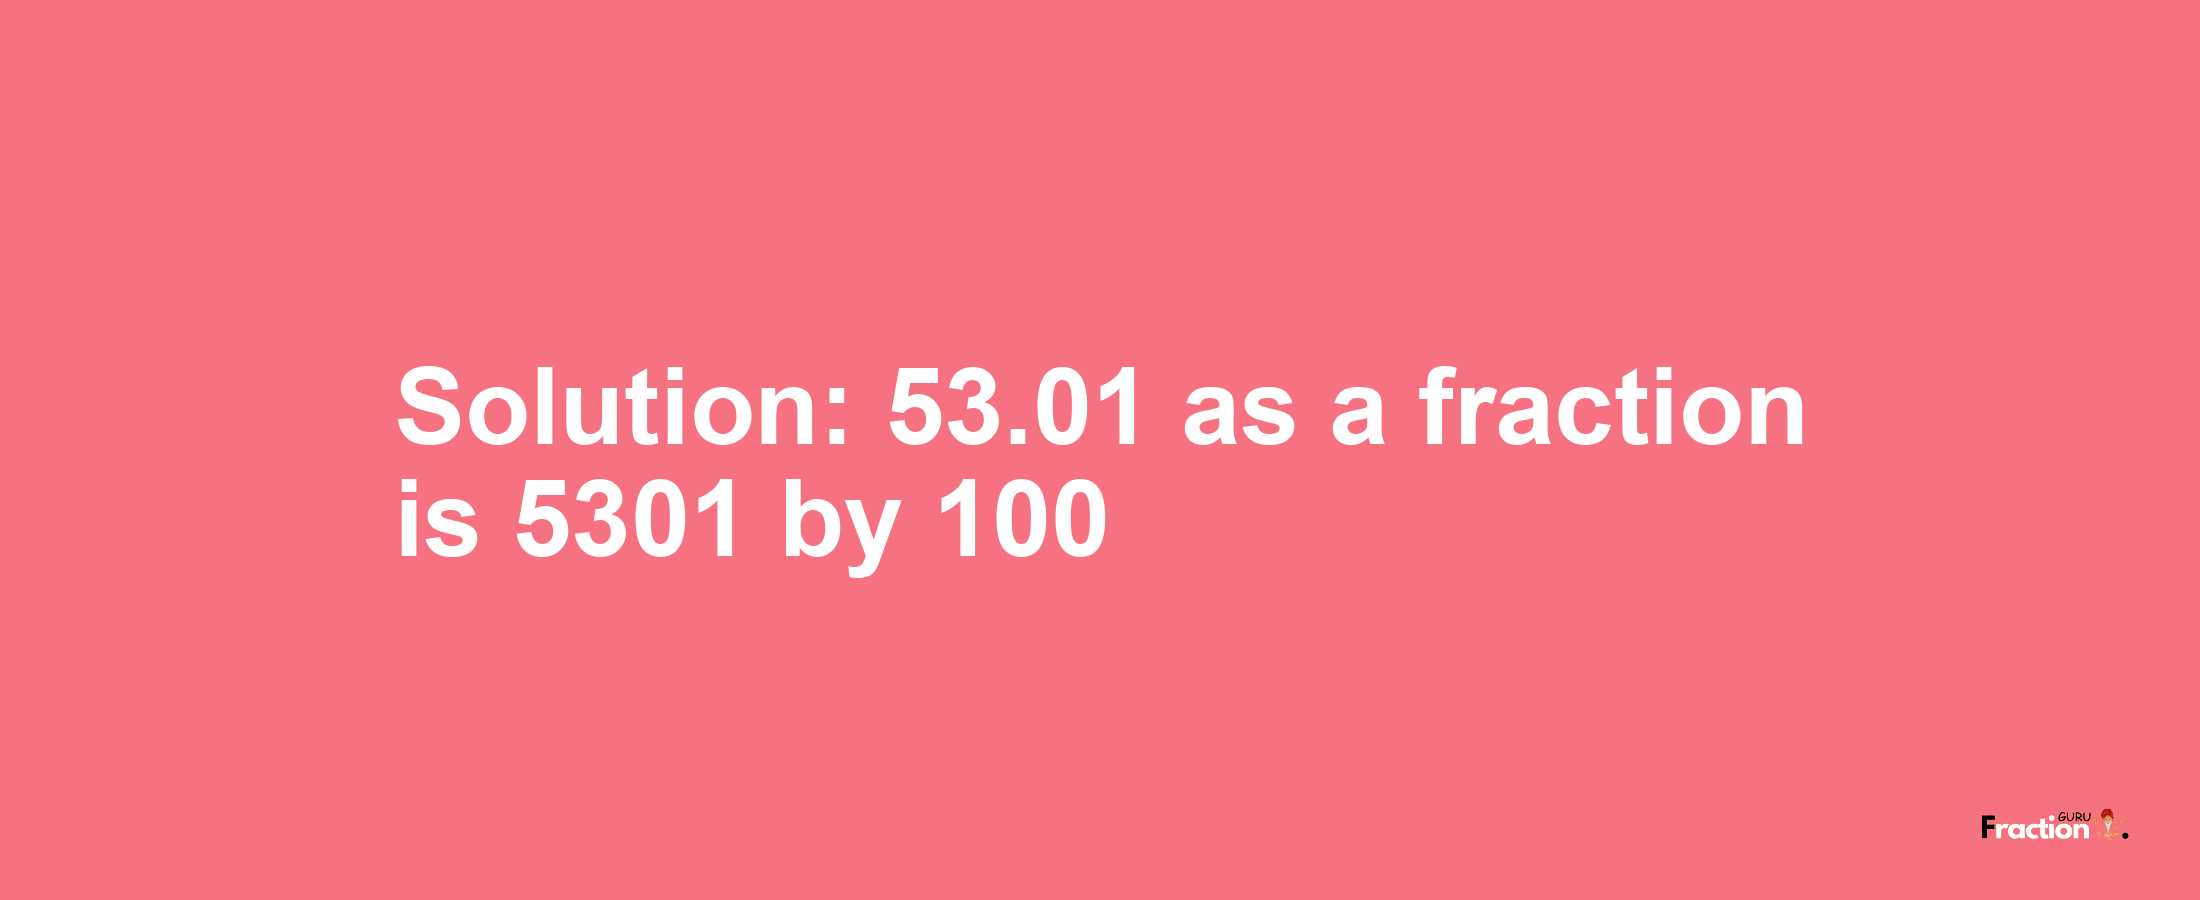 Solution:53.01 as a fraction is 5301/100